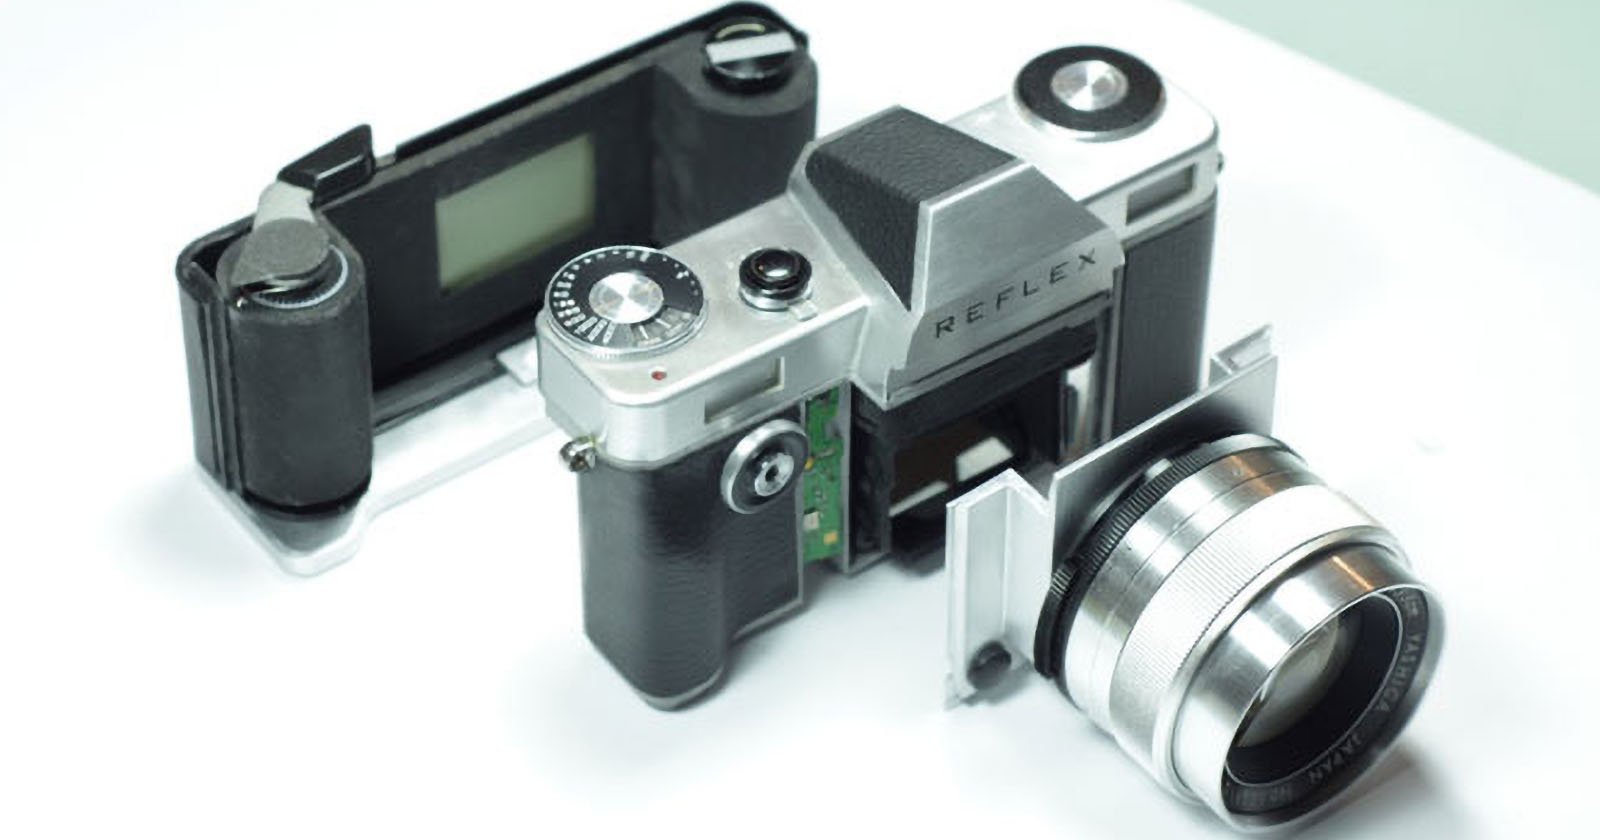 Reflex is the First 35mm Manual Camera Design in 25 Years PetaPixel